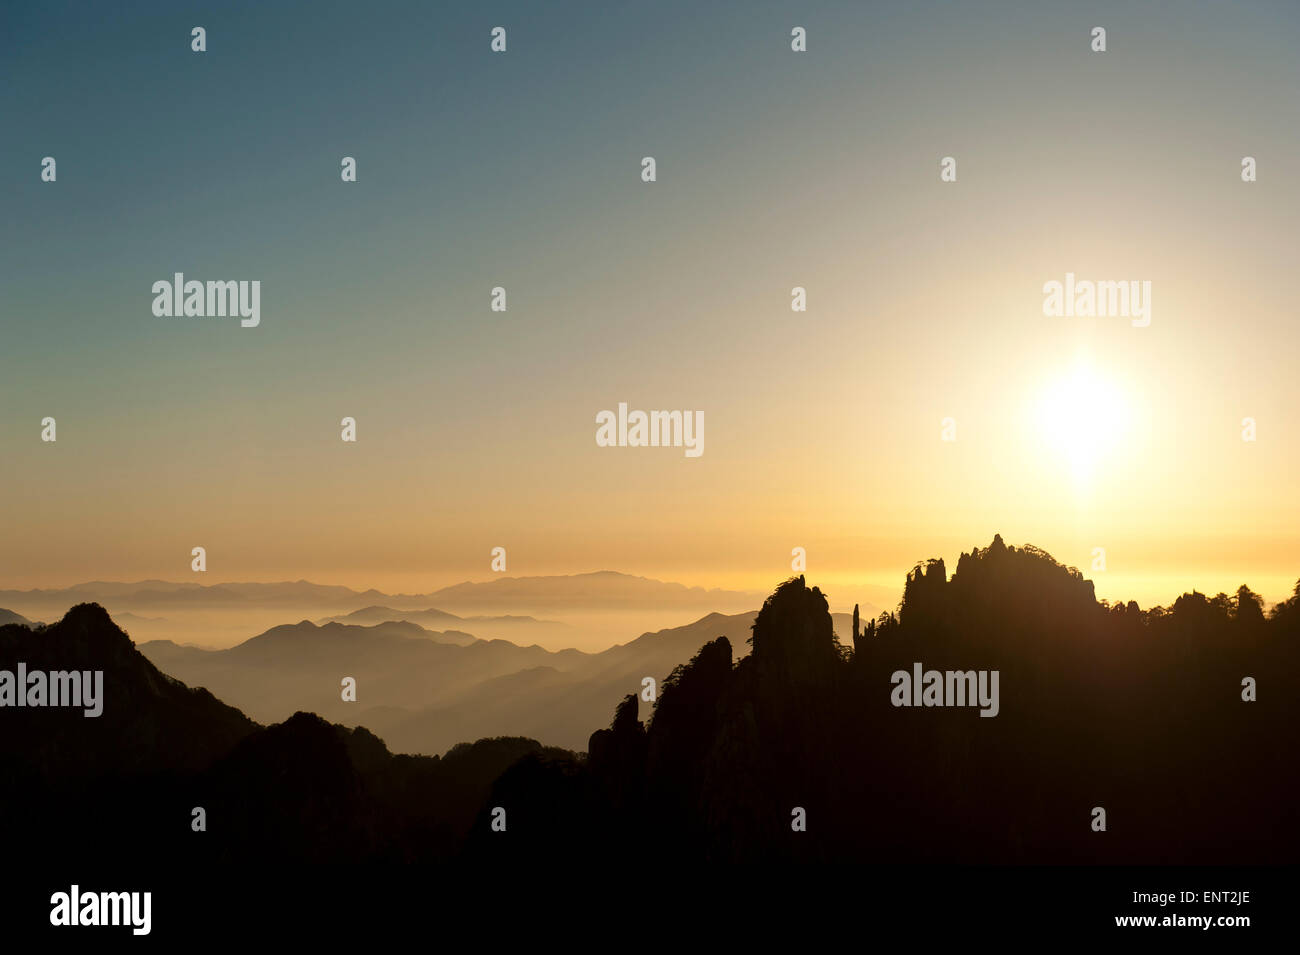 Morning atmosphere, sunrise, rocks and mountains, silhouette, Huang Shan, Mount Huangshan, Anhui Province Stock Photo